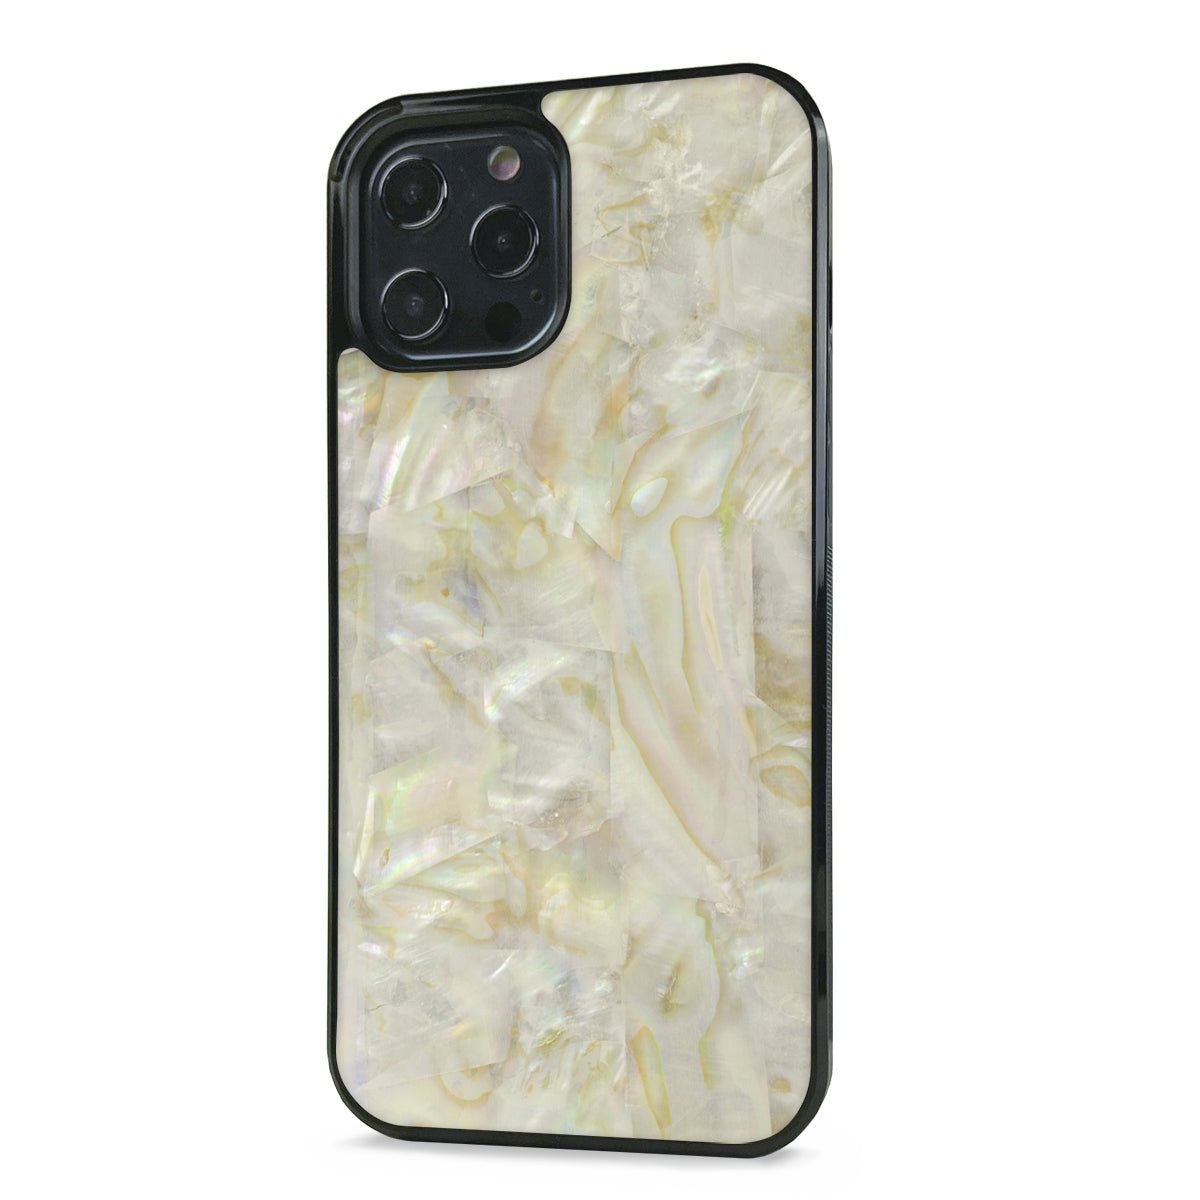 Gold Mother Of Pearl Pearl Iphone 12 Pro Max Shell Explorer Case Shell Cases Cover Up